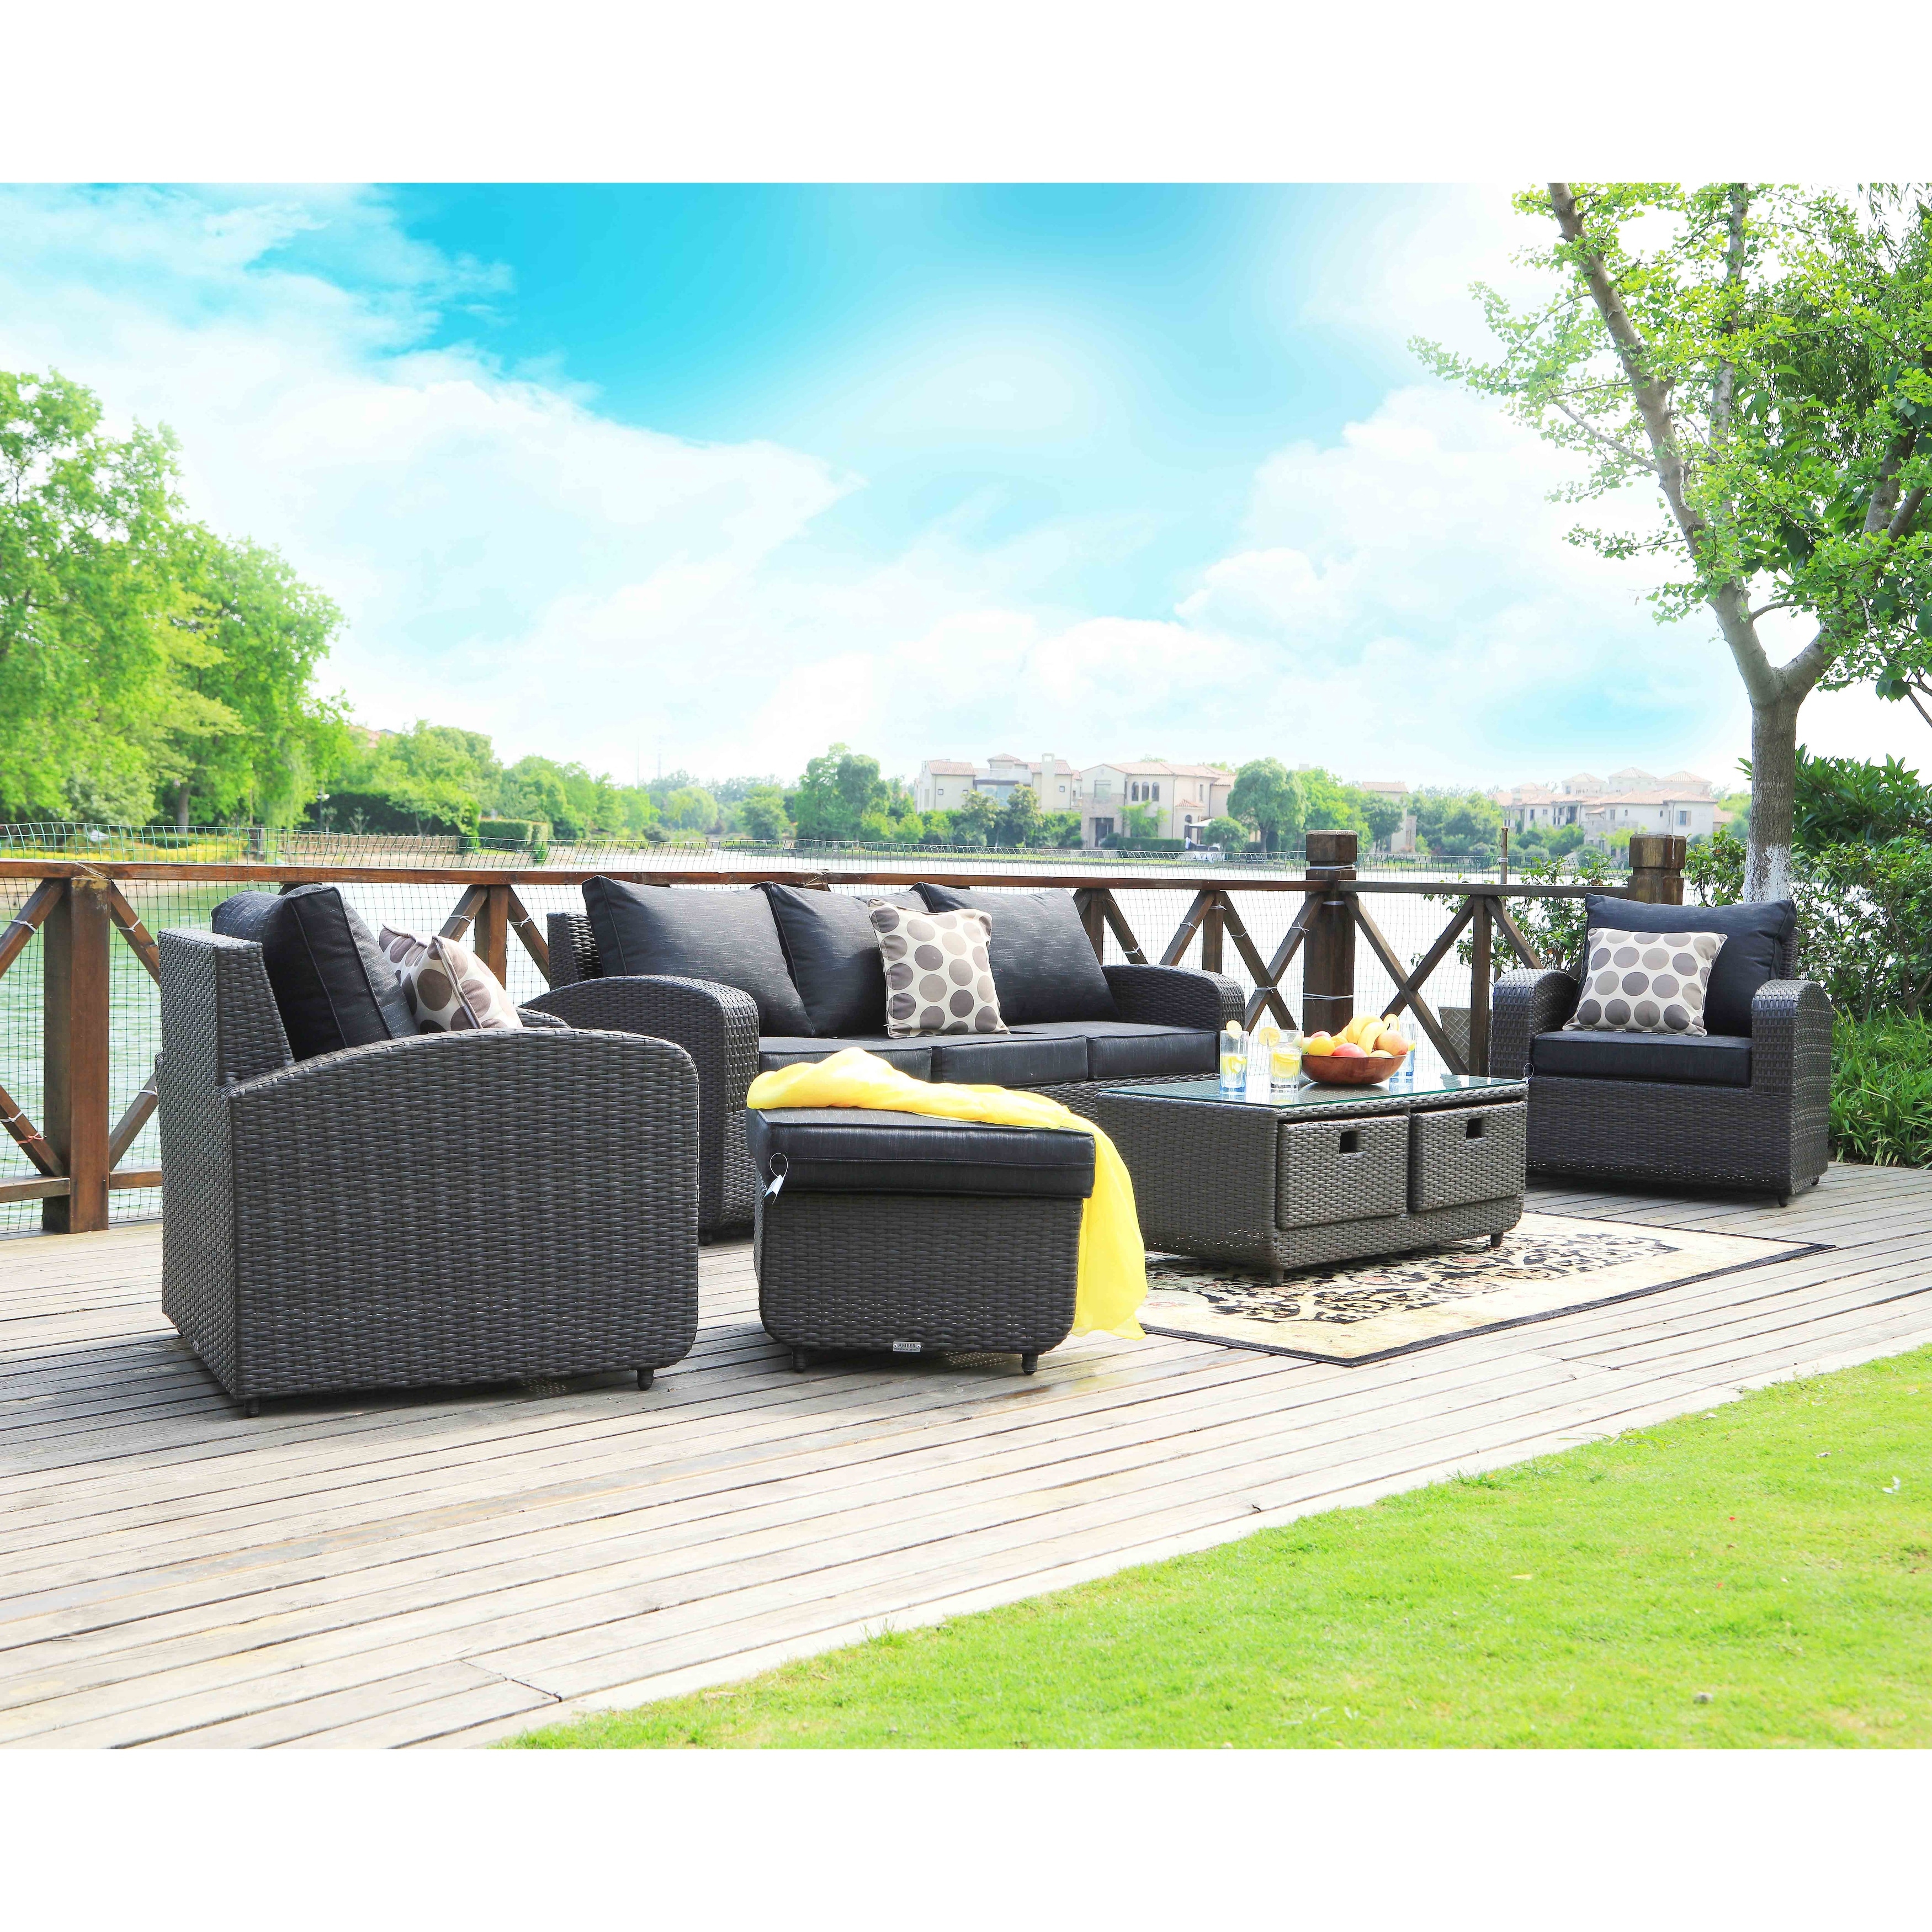 5-piece Wicker Patio Sofa Set With Drawer Table By None